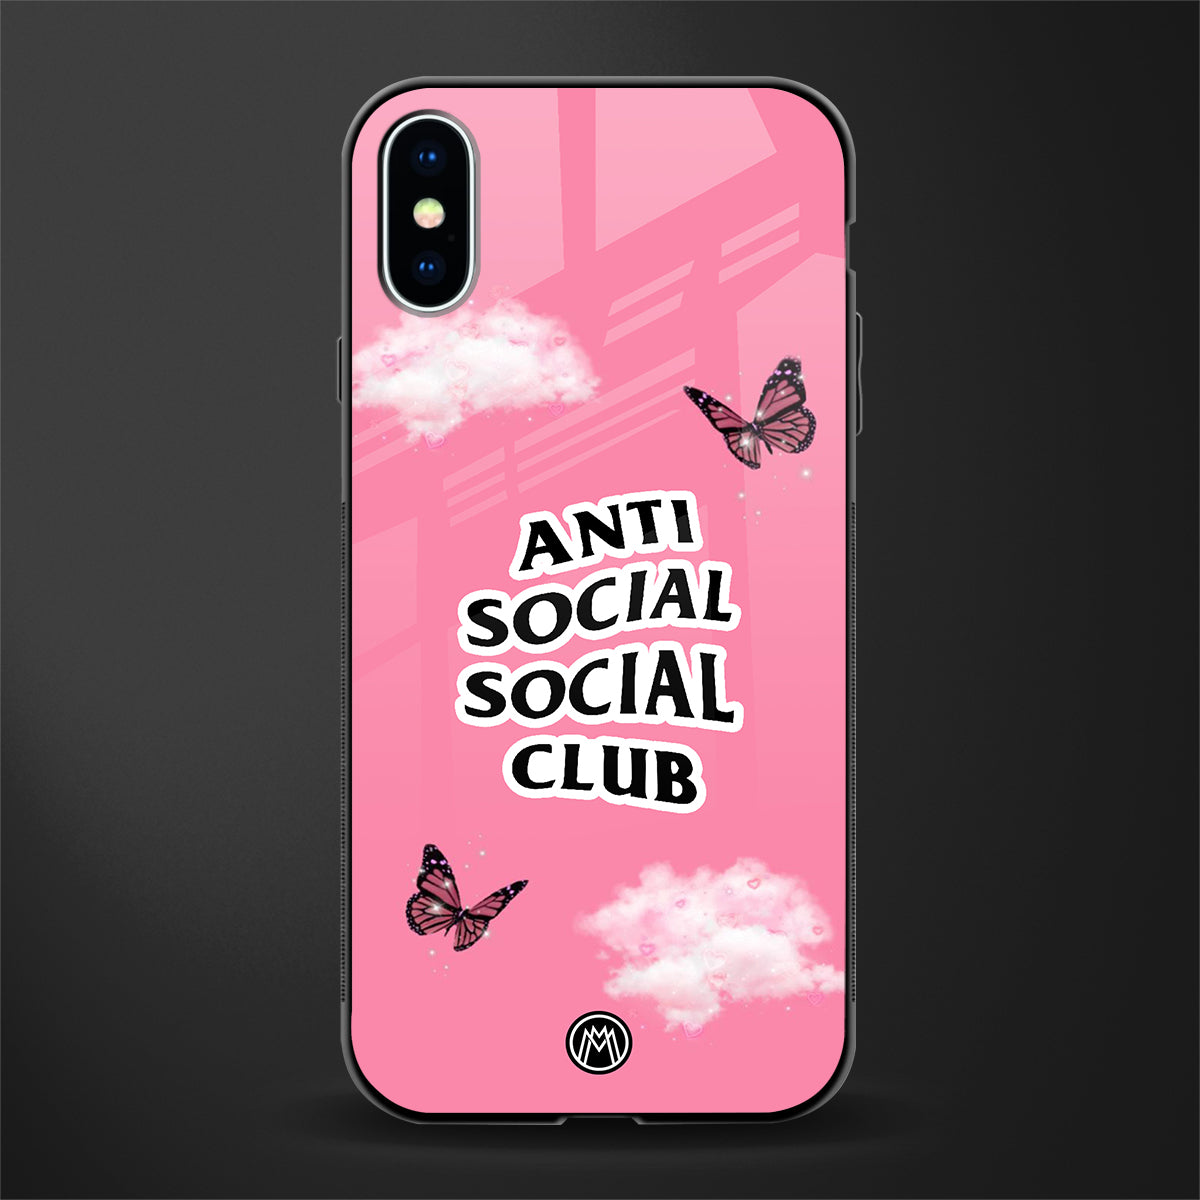 anti social social club pink edition glass case for iphone x image